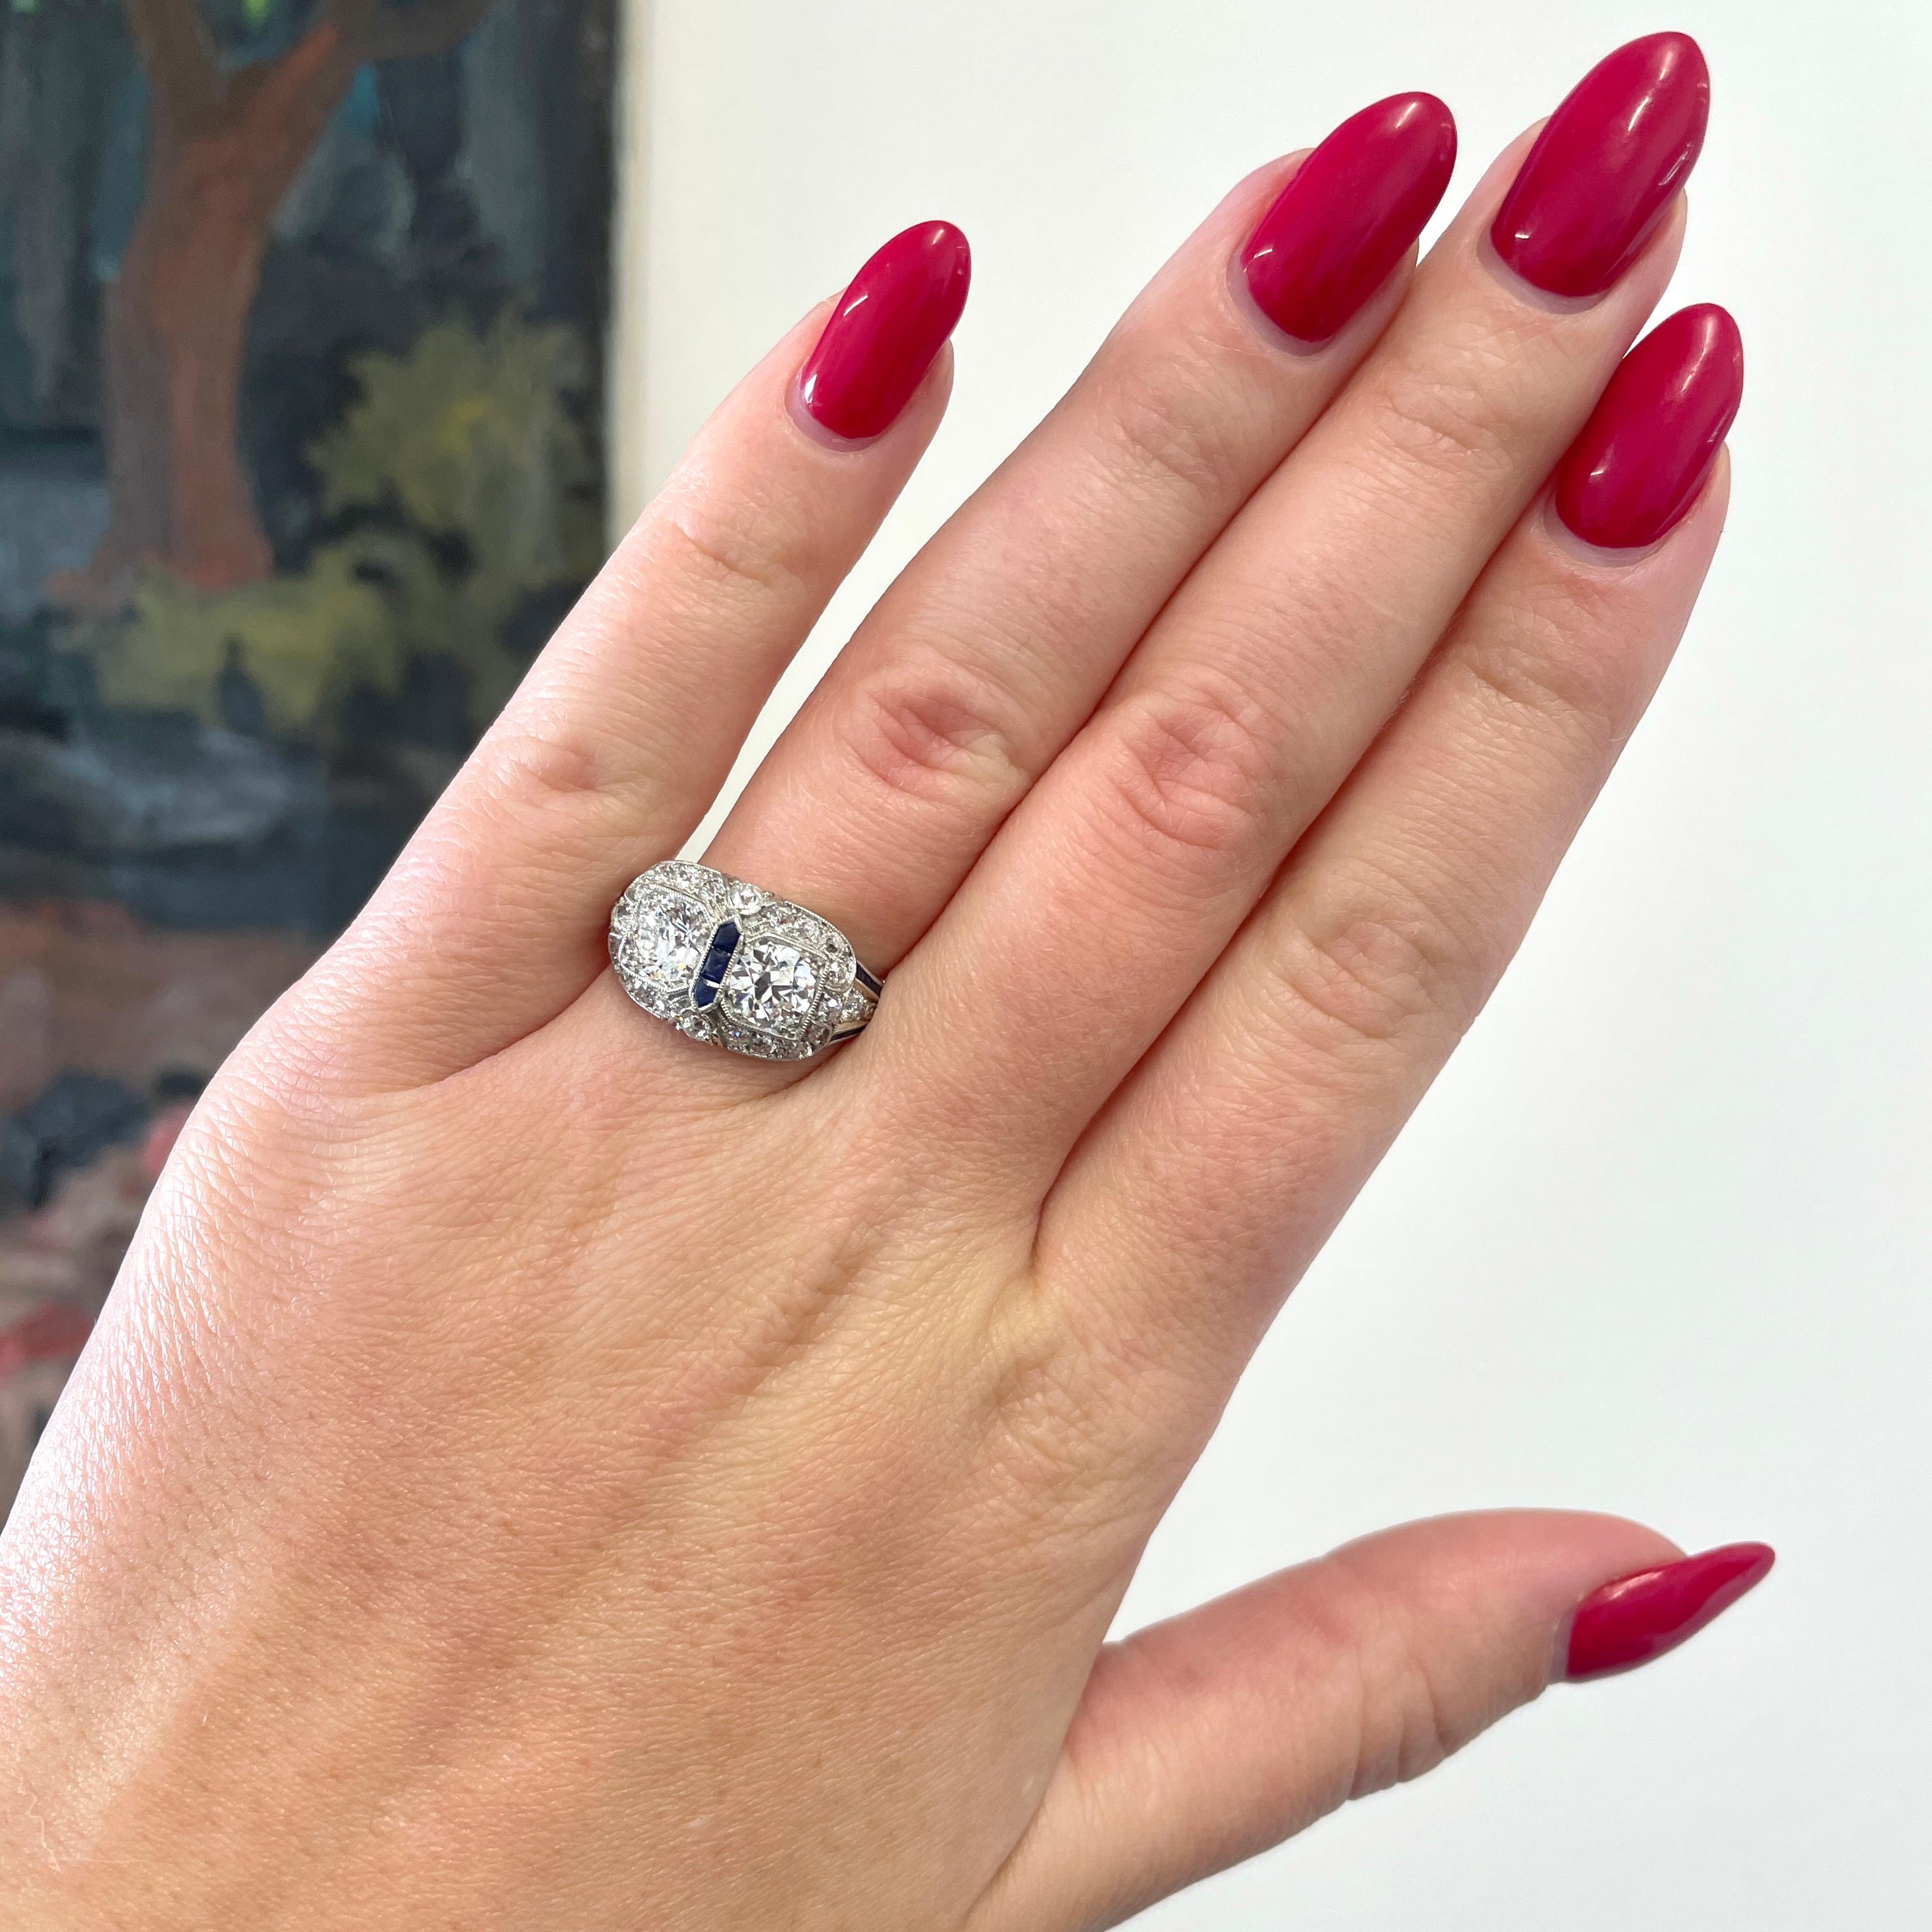 Art Deco, aka the Roaring 20s are known for endless parties and dancing, strong cocktails and lavish lifestyle. The jewelry from this period truly reflect the iconic era. This Art Deco Diamond Sapphire Platinum Ring is an outstanding example of